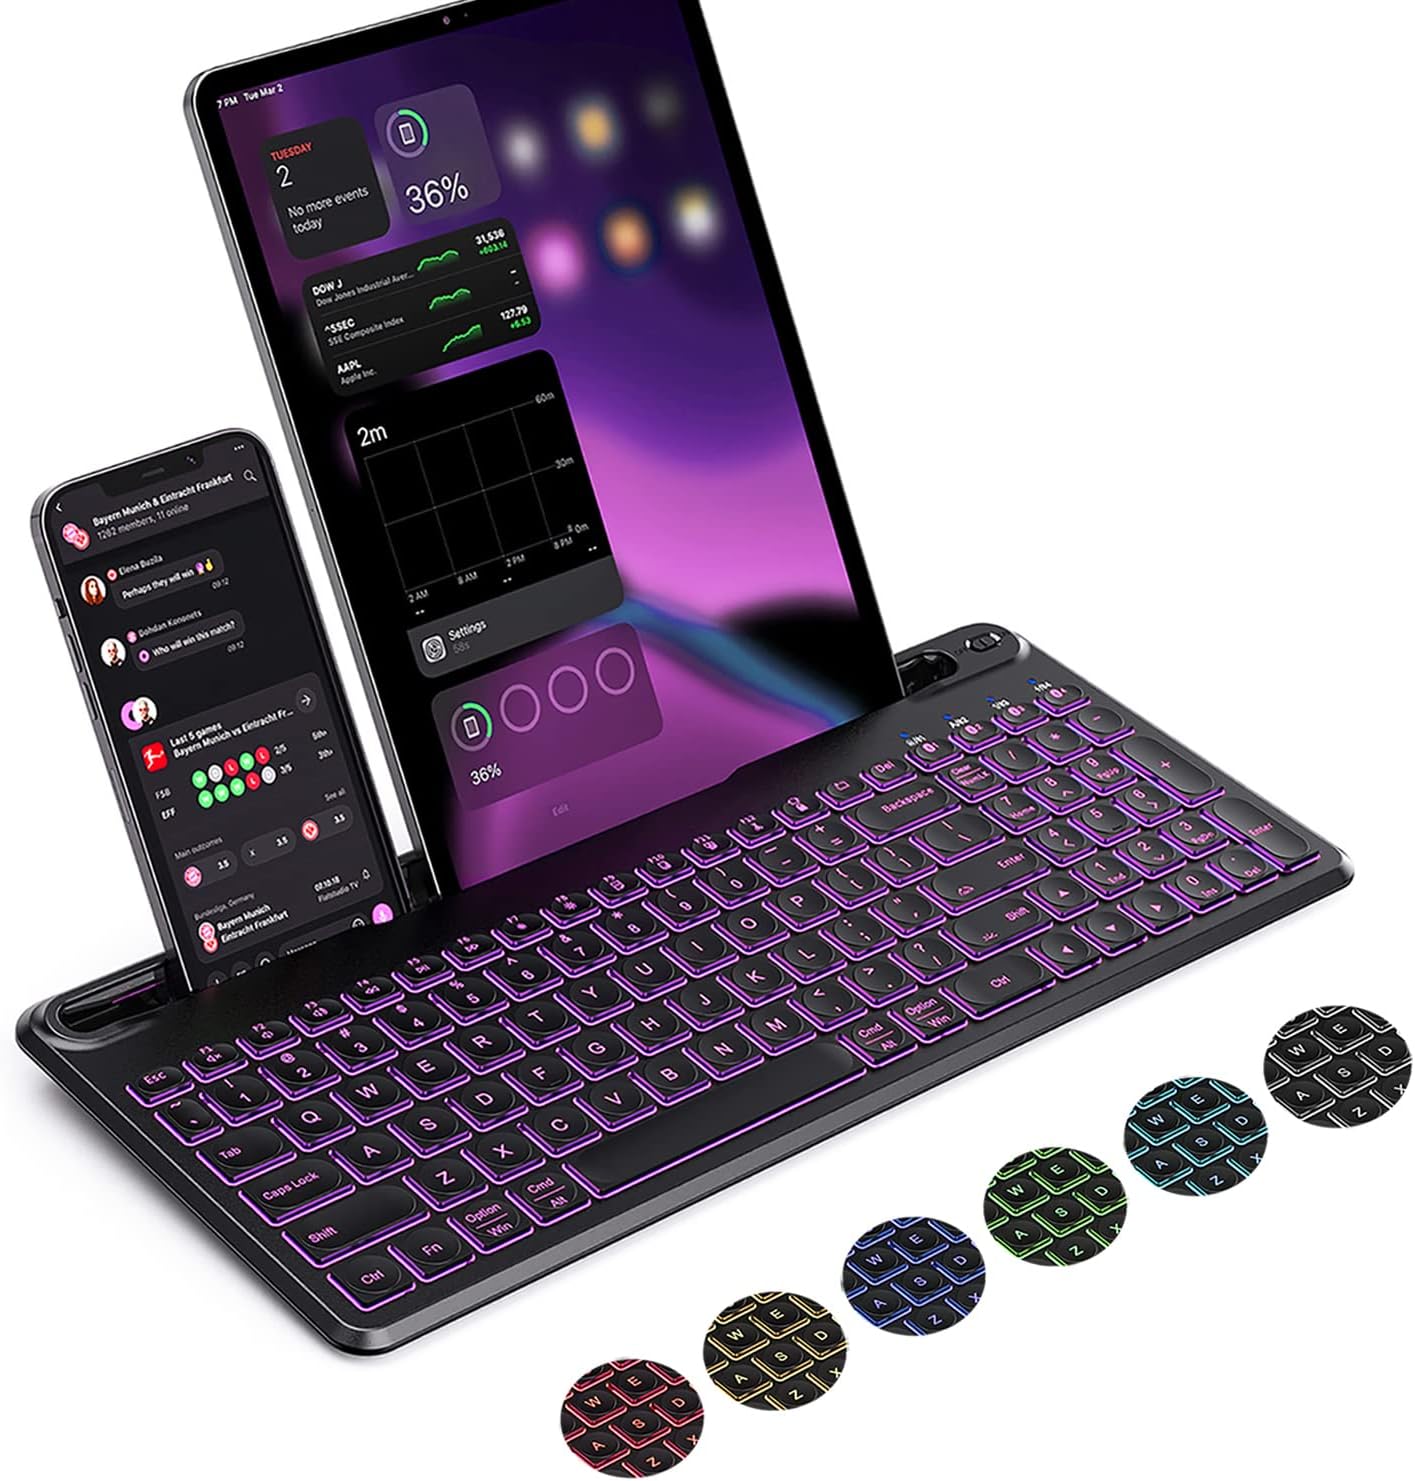 THE seenda Backlit Multi-Device Bluetooth Keyboard for Tablet Phone Computer - Wireless Illuminated Rechargeable Keyboard with Number Pad Connect Up to 4 Devices Compatible Mac Android iOS Windows